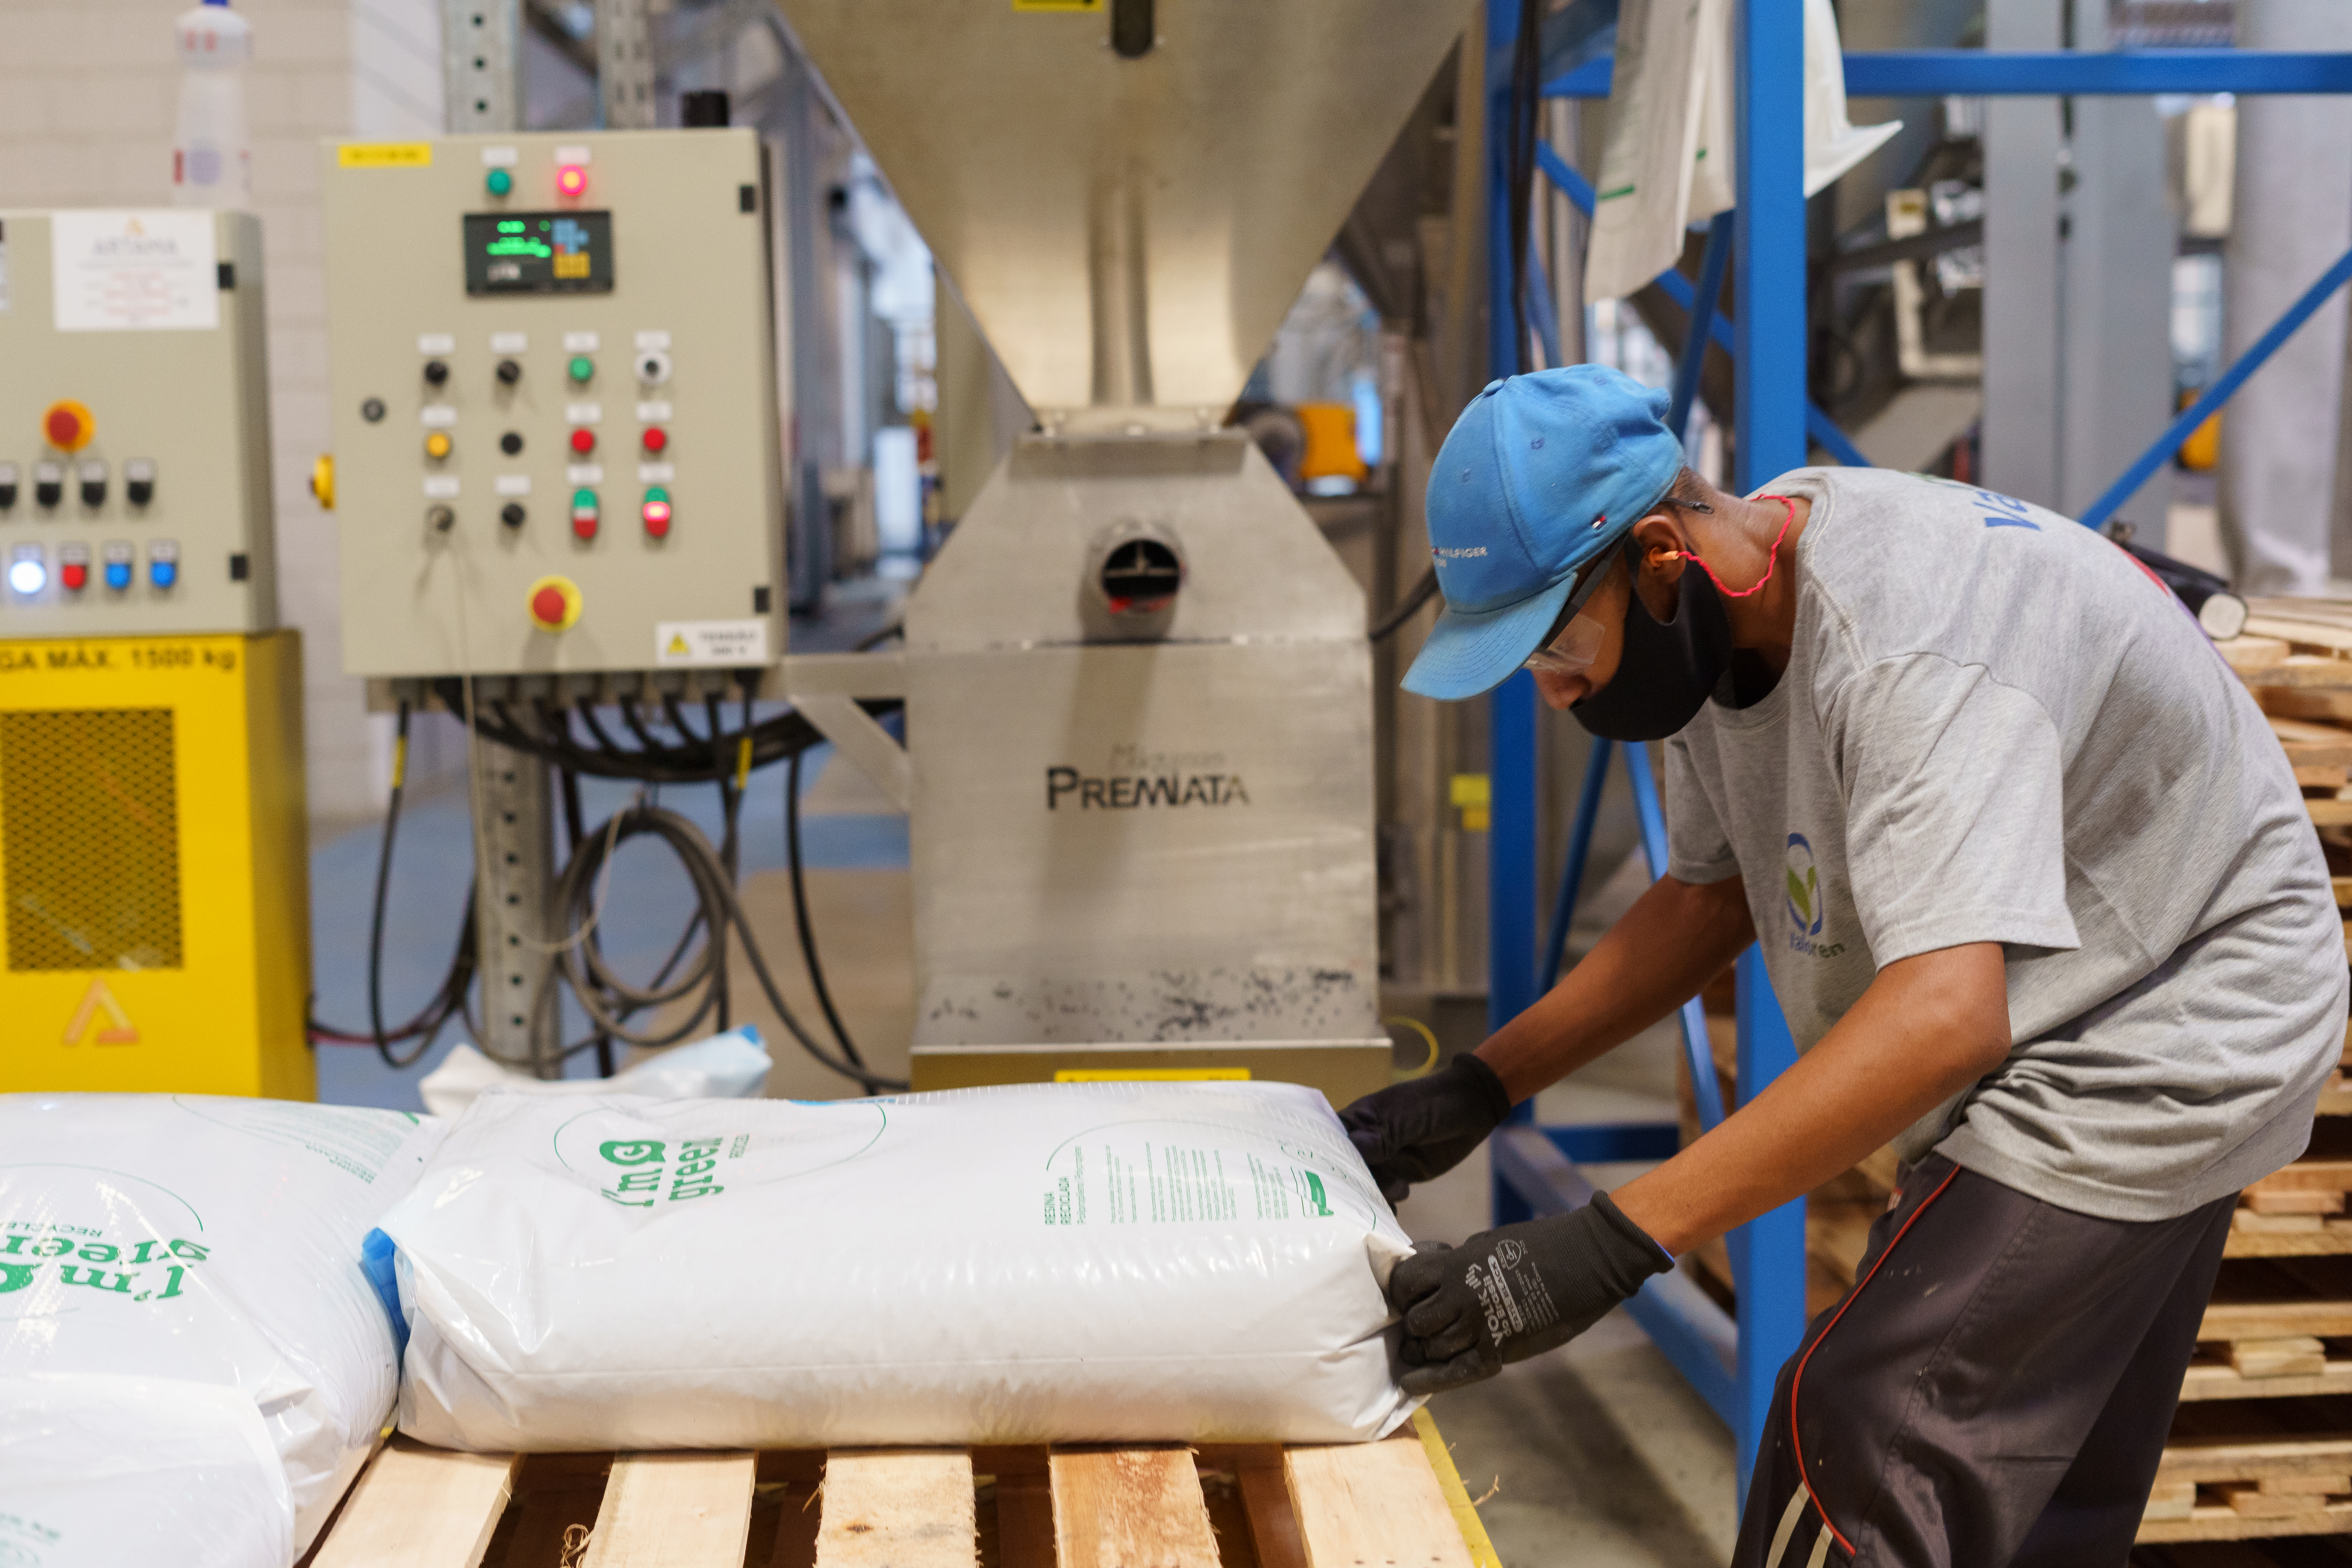 Braskem invests in capacity expansion and partnerships for the production of biobased plastics